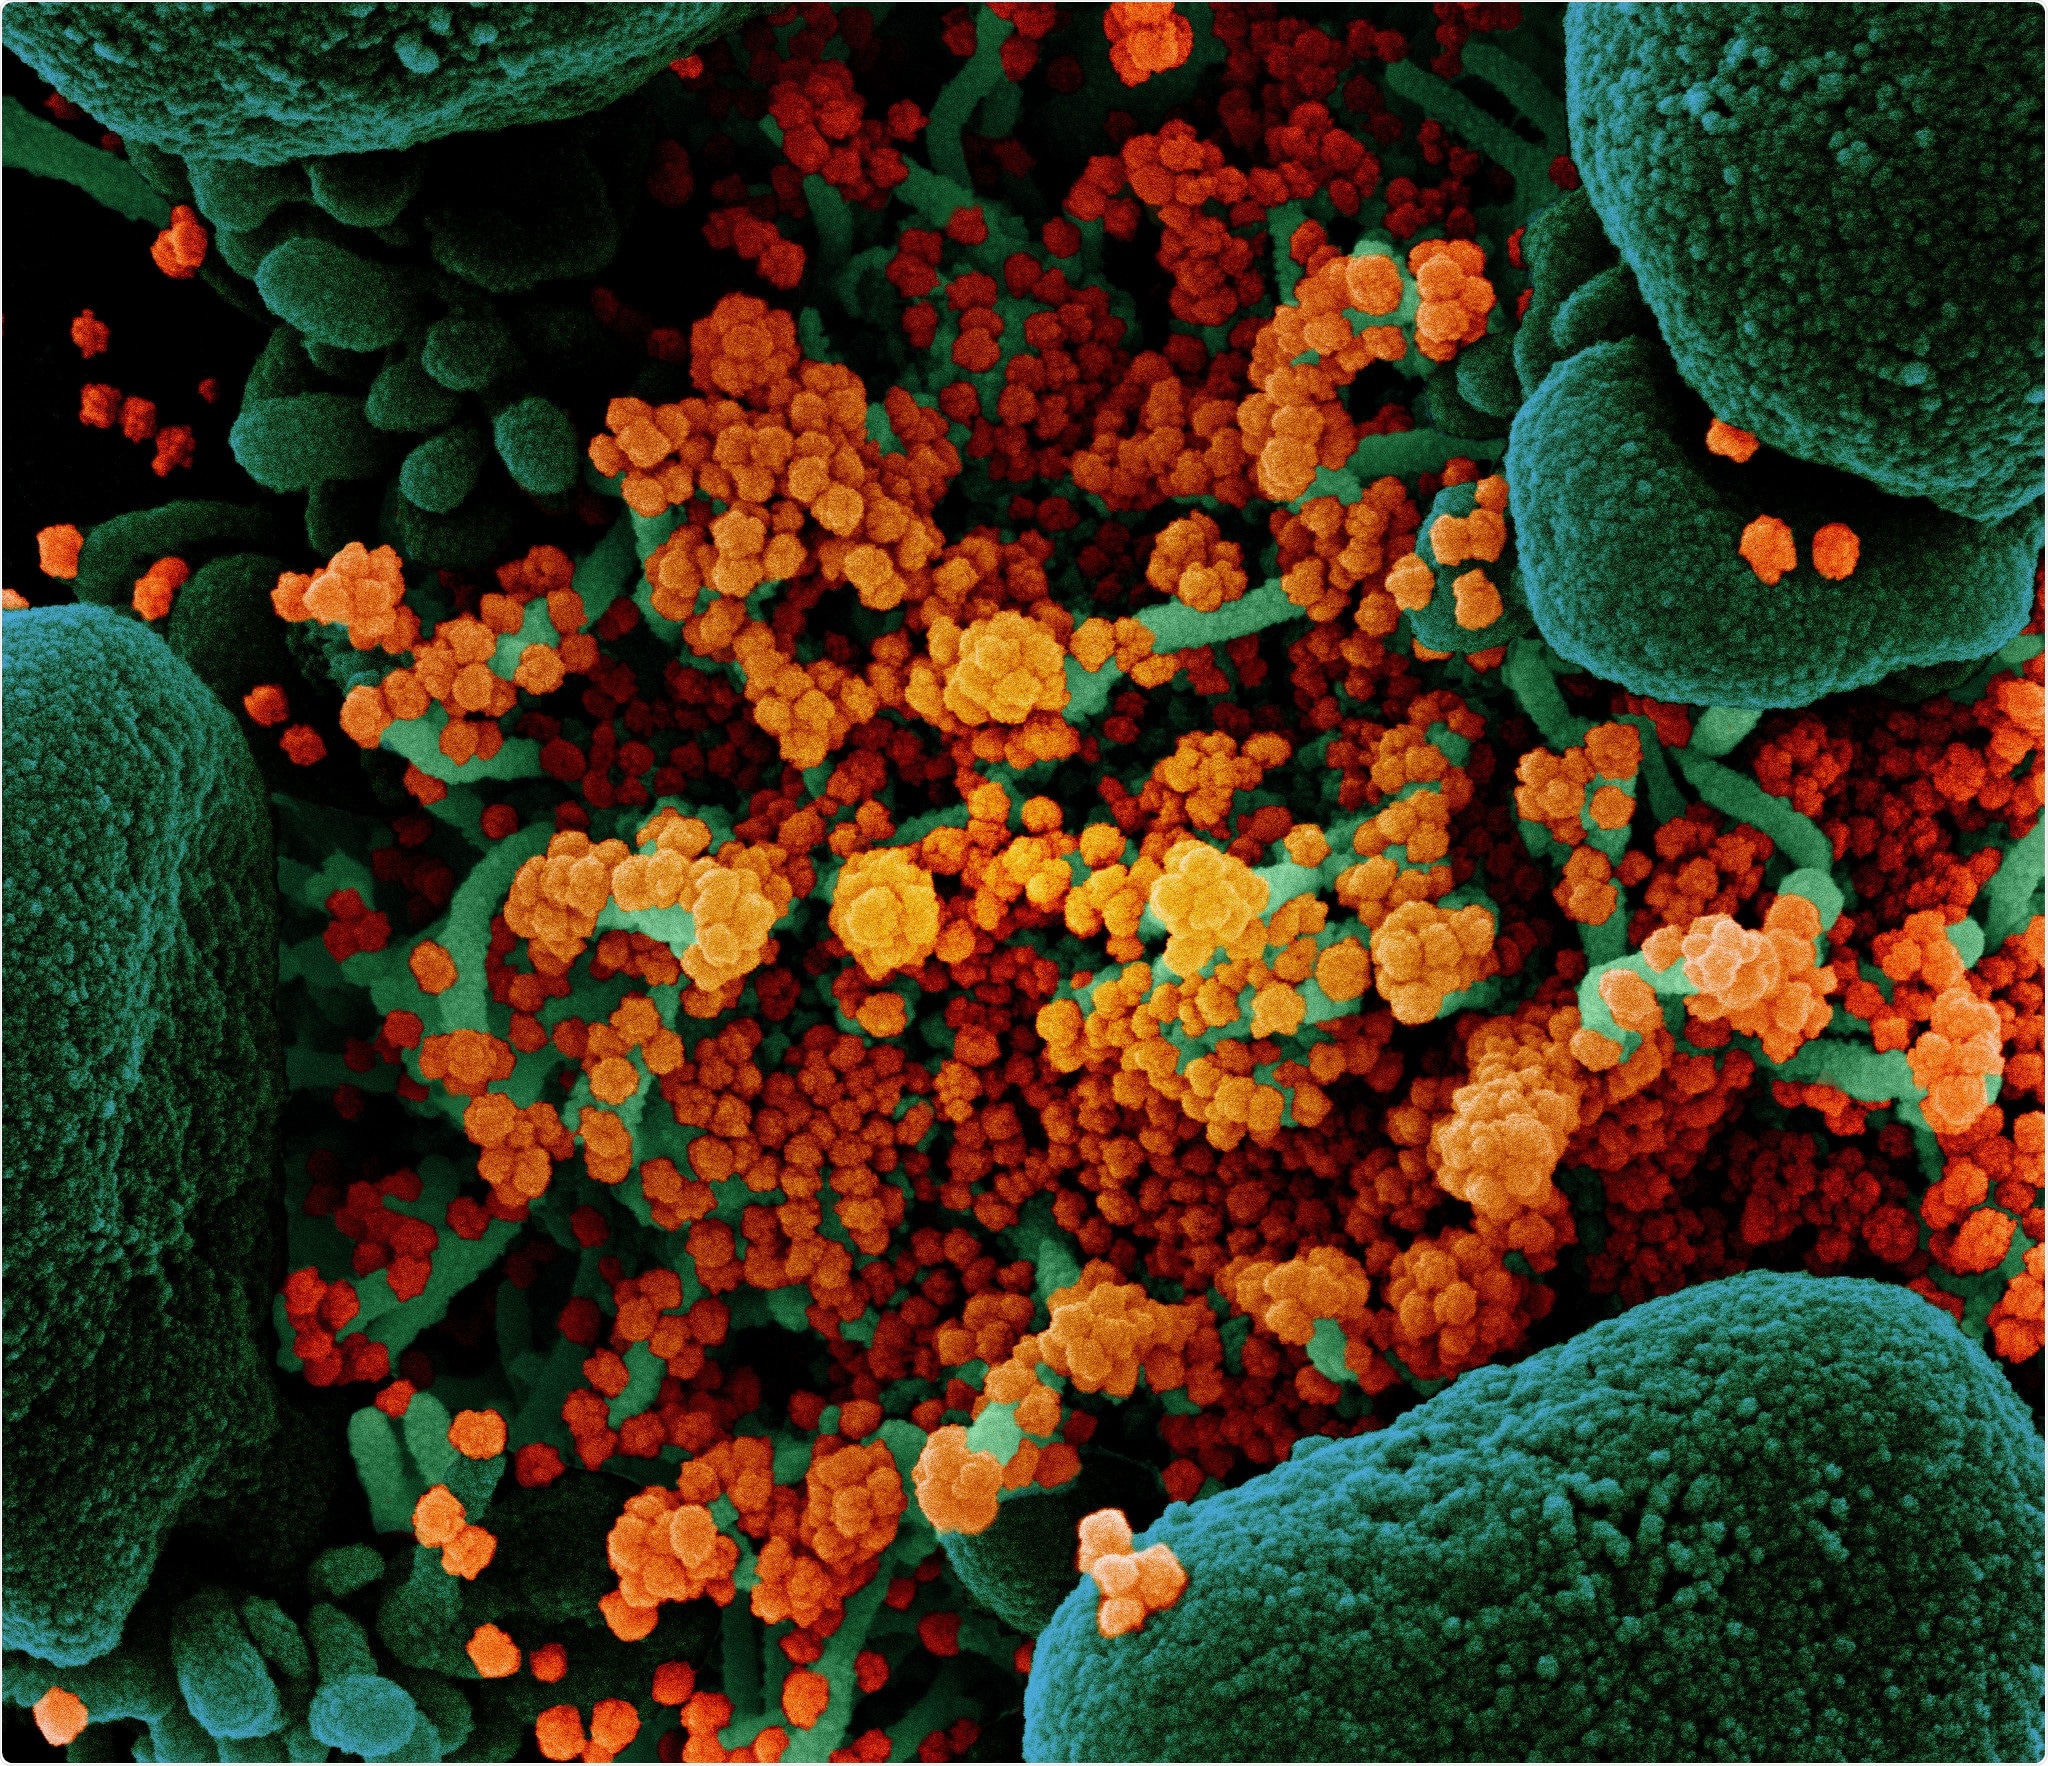 Novel Coronavirus SARS-CoV-2 Colorized scanning electron micrograph of an apoptotic cell (green) heavily infected with SARS-COV-2 virus particles (orange), isolated from a patient sample. Image at the NIAID Integrated Research Facility (IRF) in Fort Detrick, Maryland. Credit: NIAID